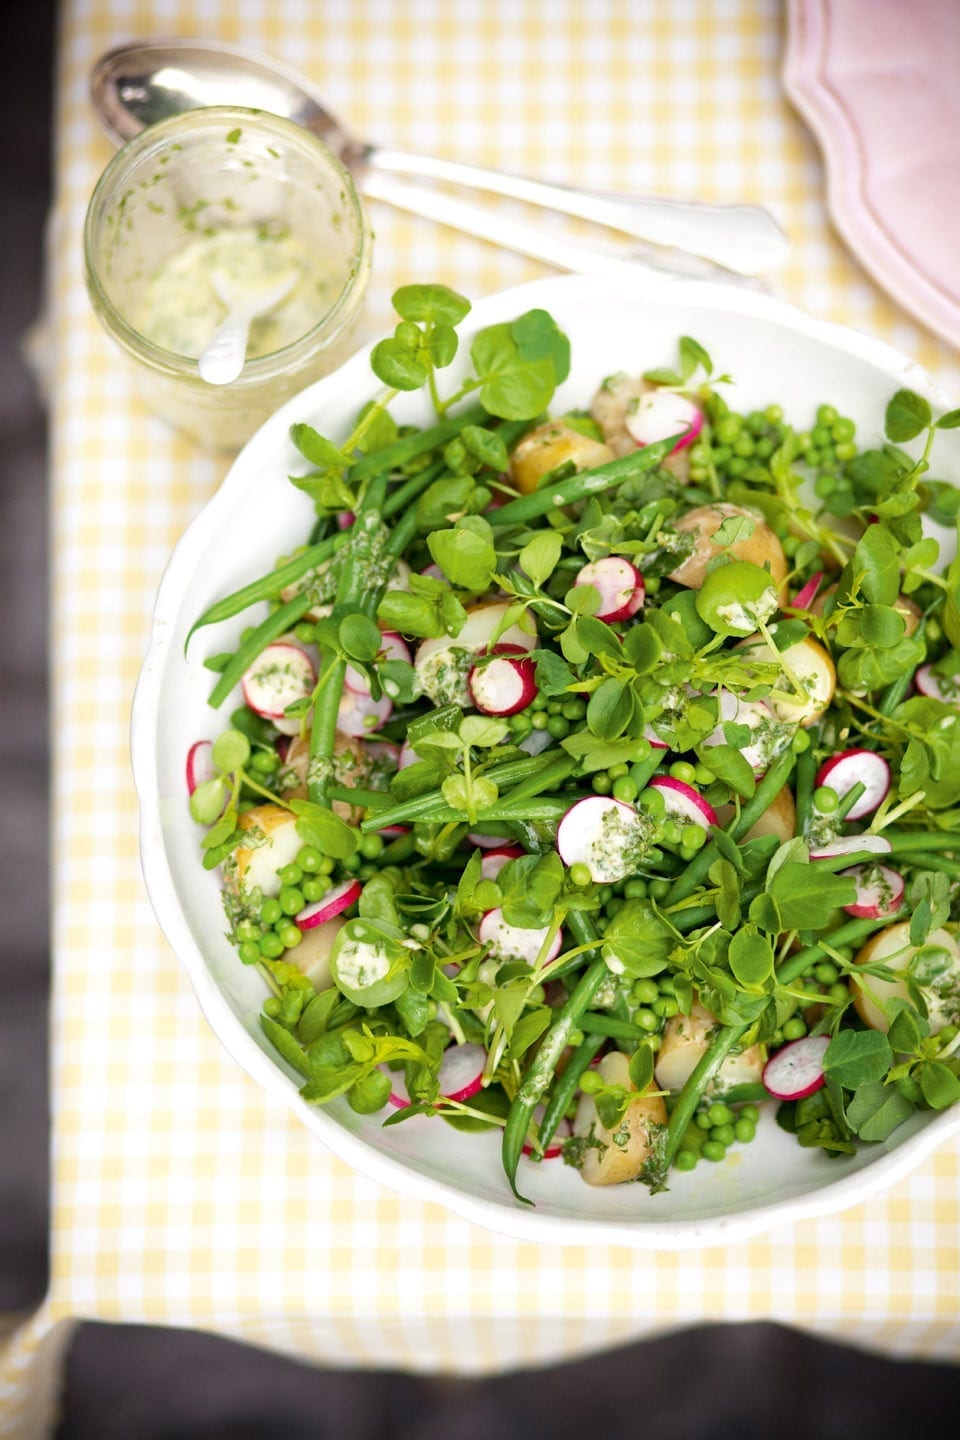 Green bean and pea salad with salad cream dressing